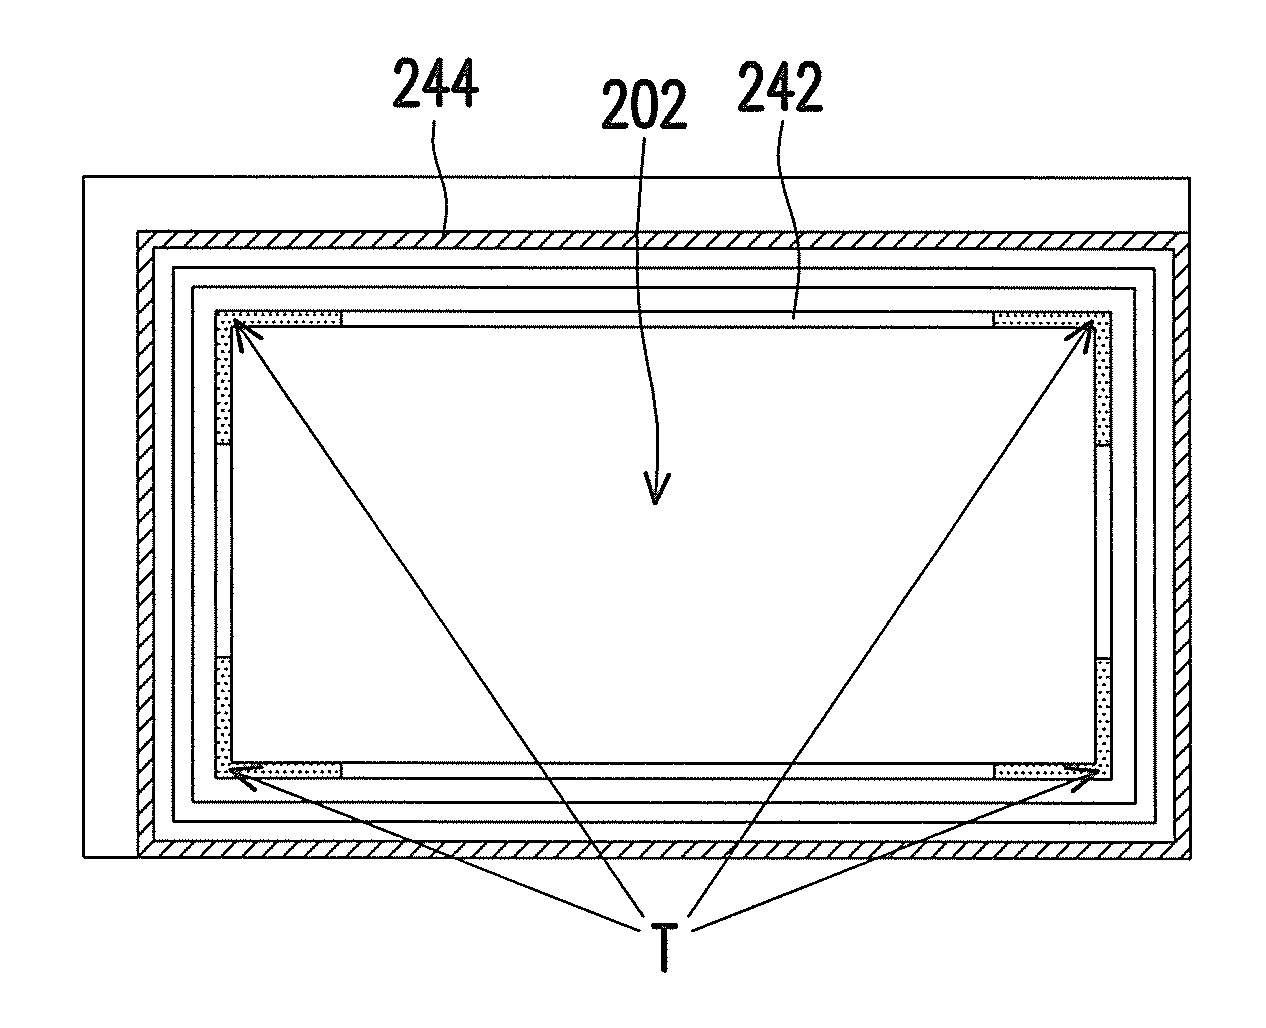 Display panel and sealing structure